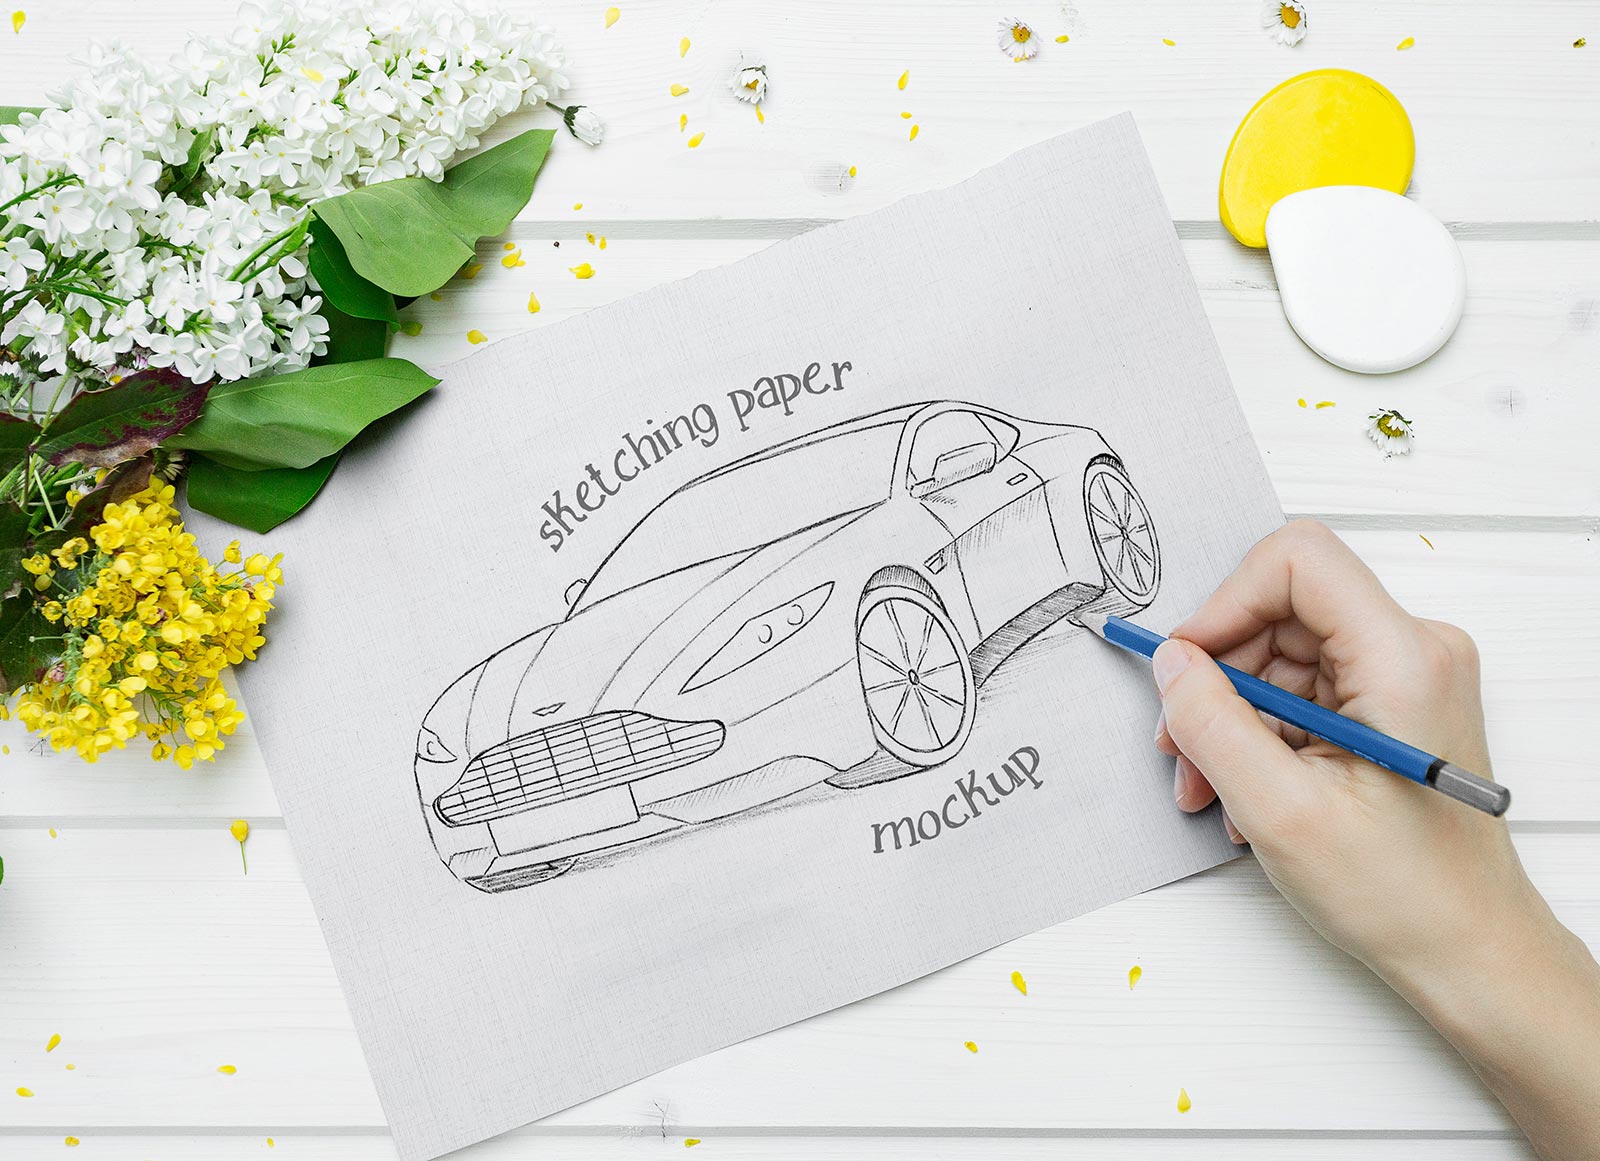 Thick Sketch / Drawing Paper Mockup